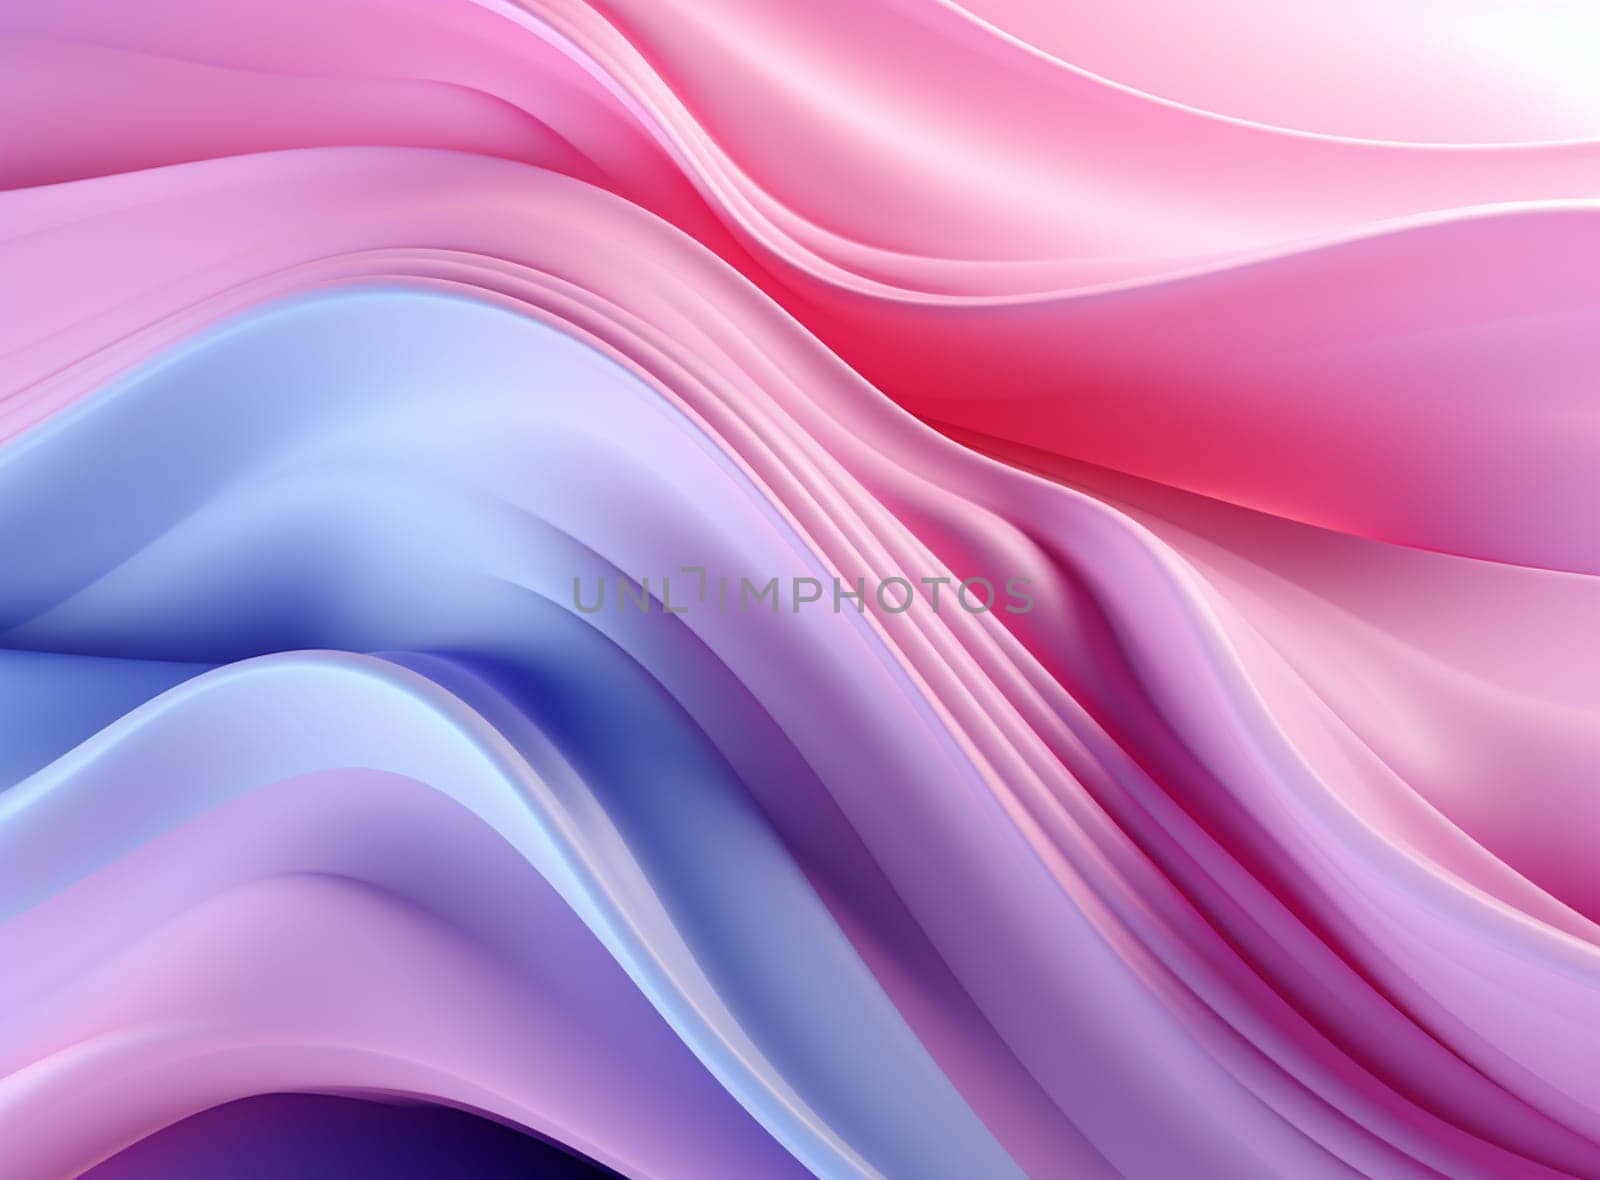 an abstract 3D image of digital waves in shades of Pink, Blue and purple - wave illustration. . High quality photo